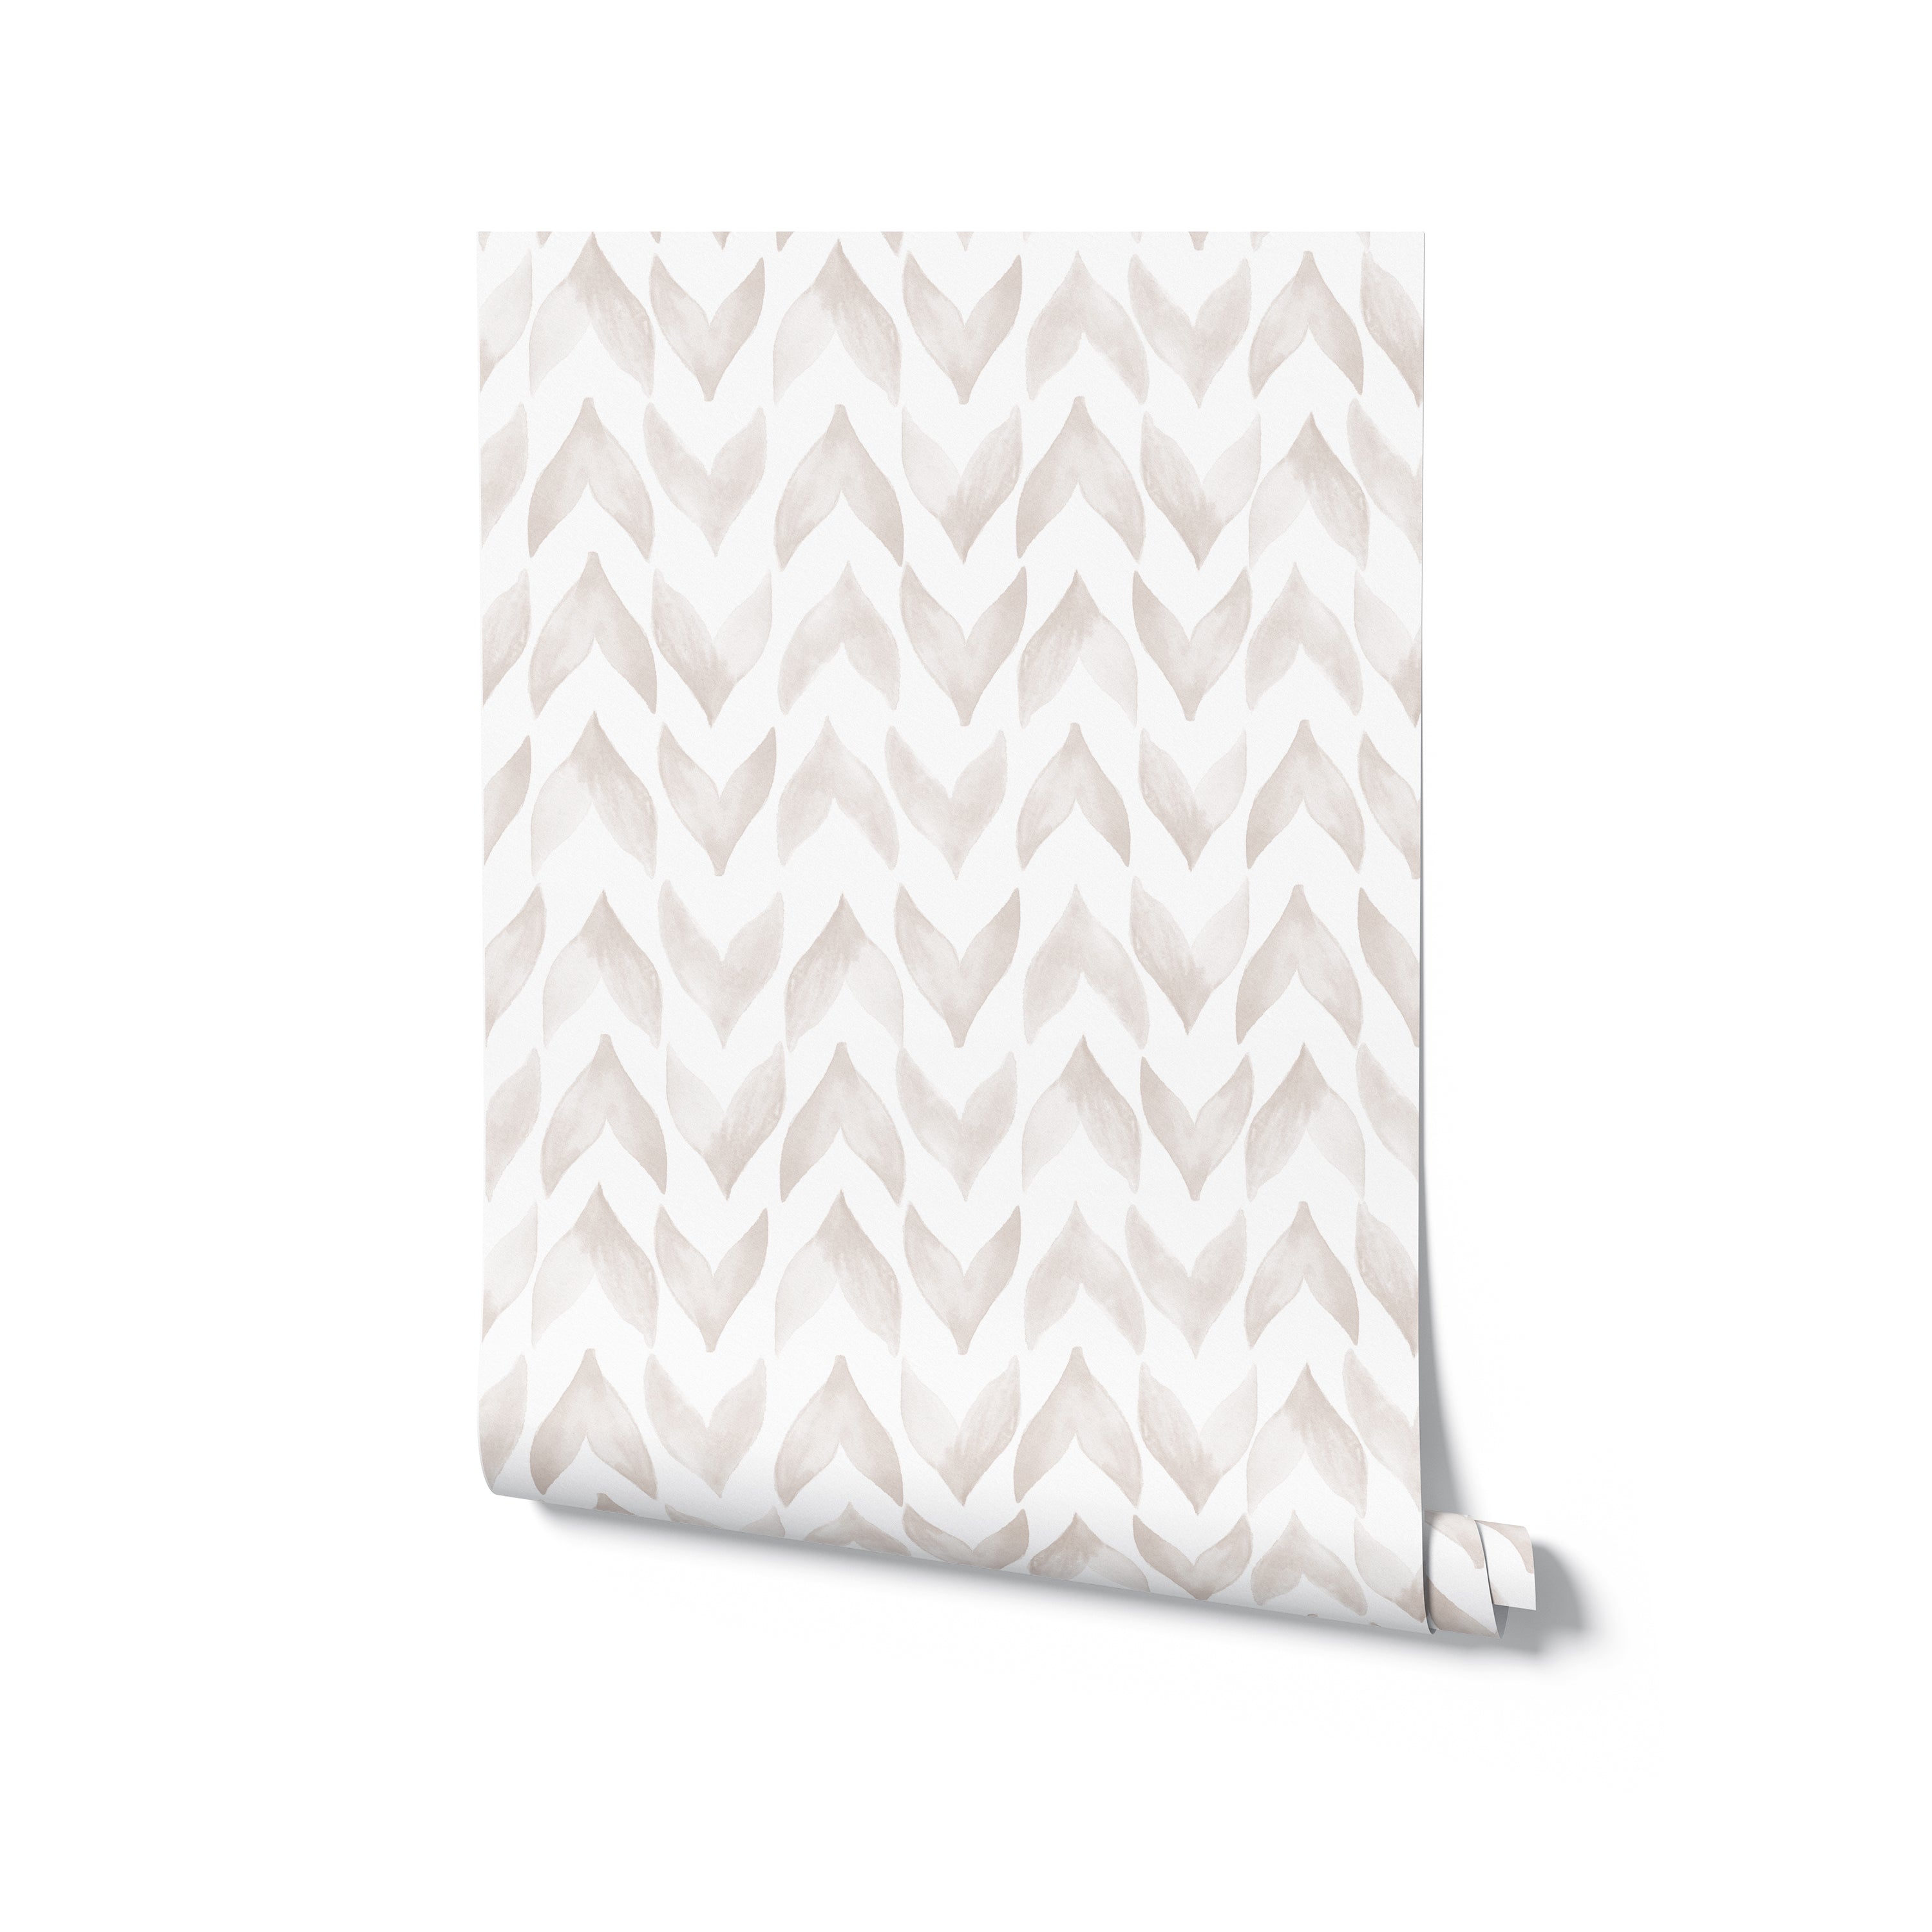 A rolled-up wallpaper sample revealing the Moroccan Tile pattern, which consists of white and linen watercolor zigzag shapes, giving a sophisticated and contemporary feel to the design.